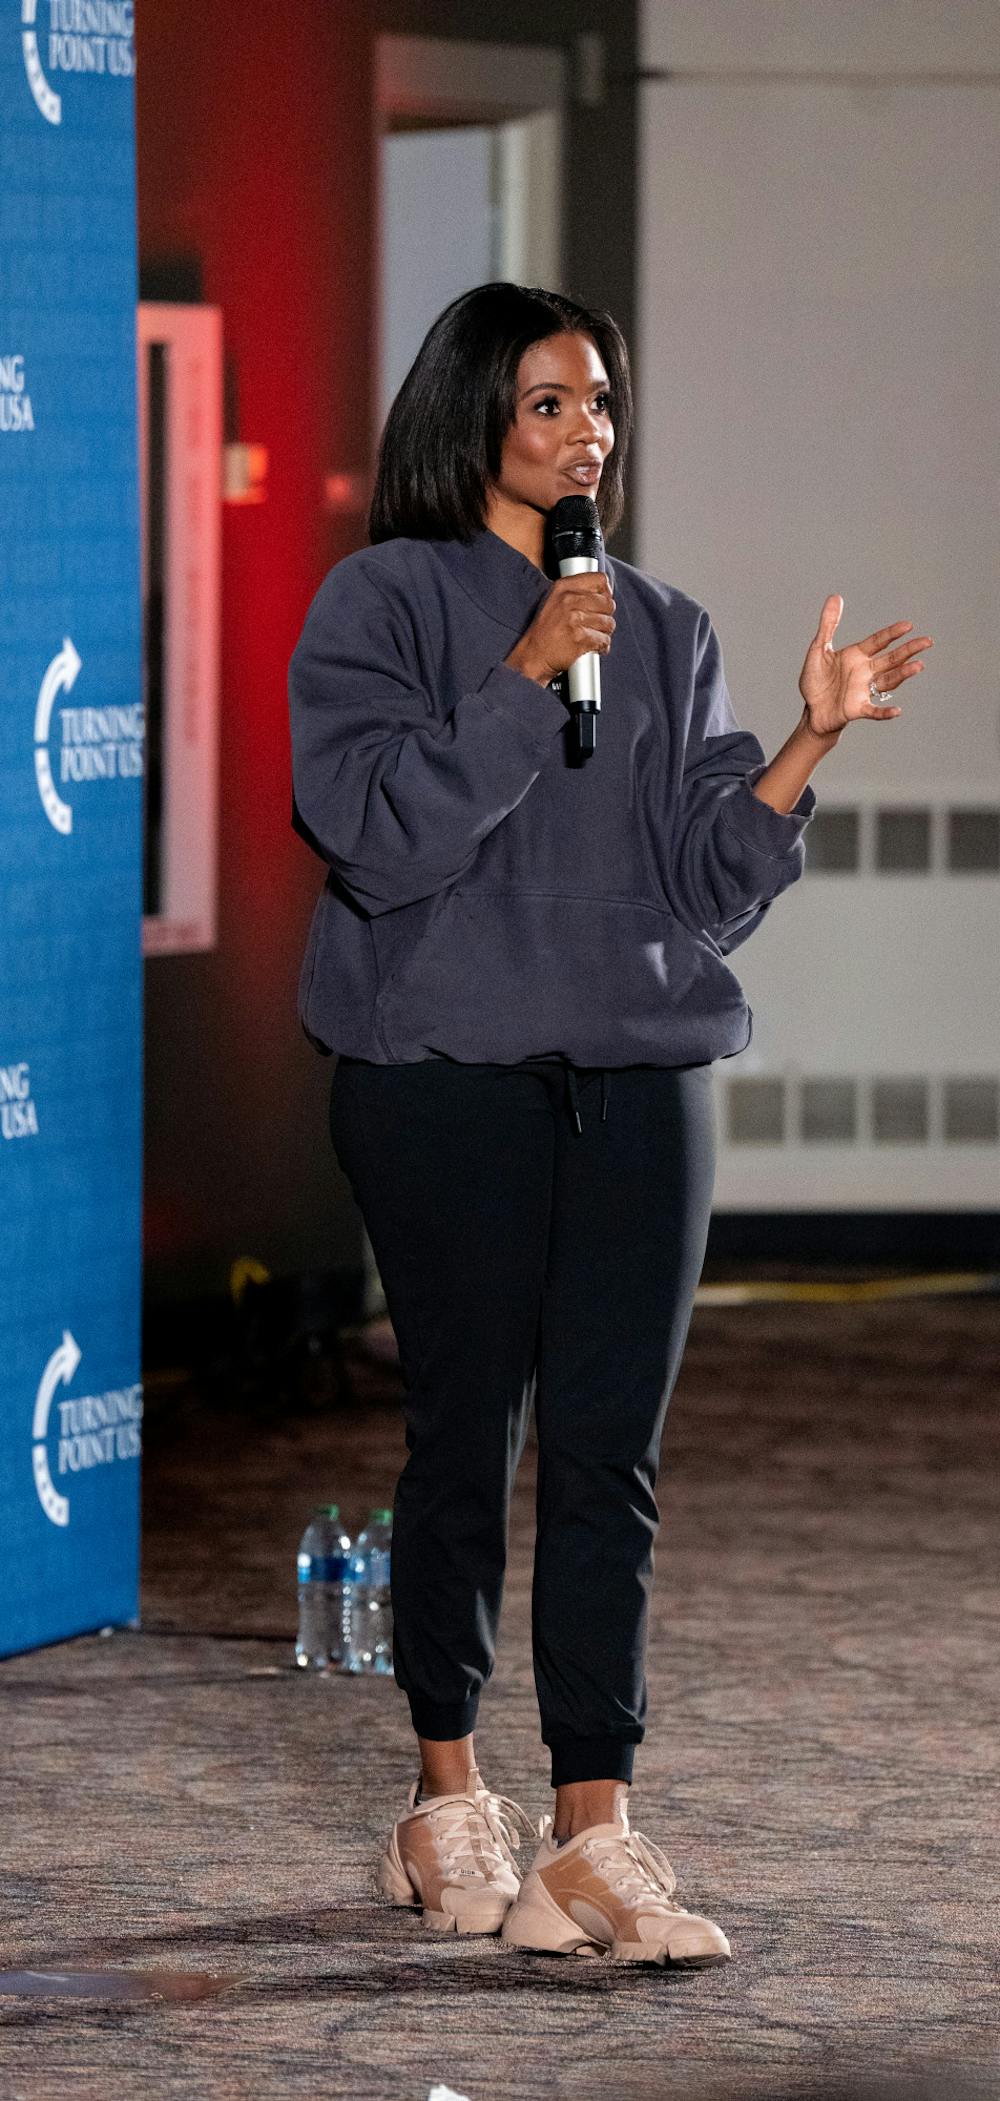 <p>﻿Candace Owens speaks out to her audience during the Turning Point tour, hosted at Broad College of Business on Oct. 13, 2022.</p>